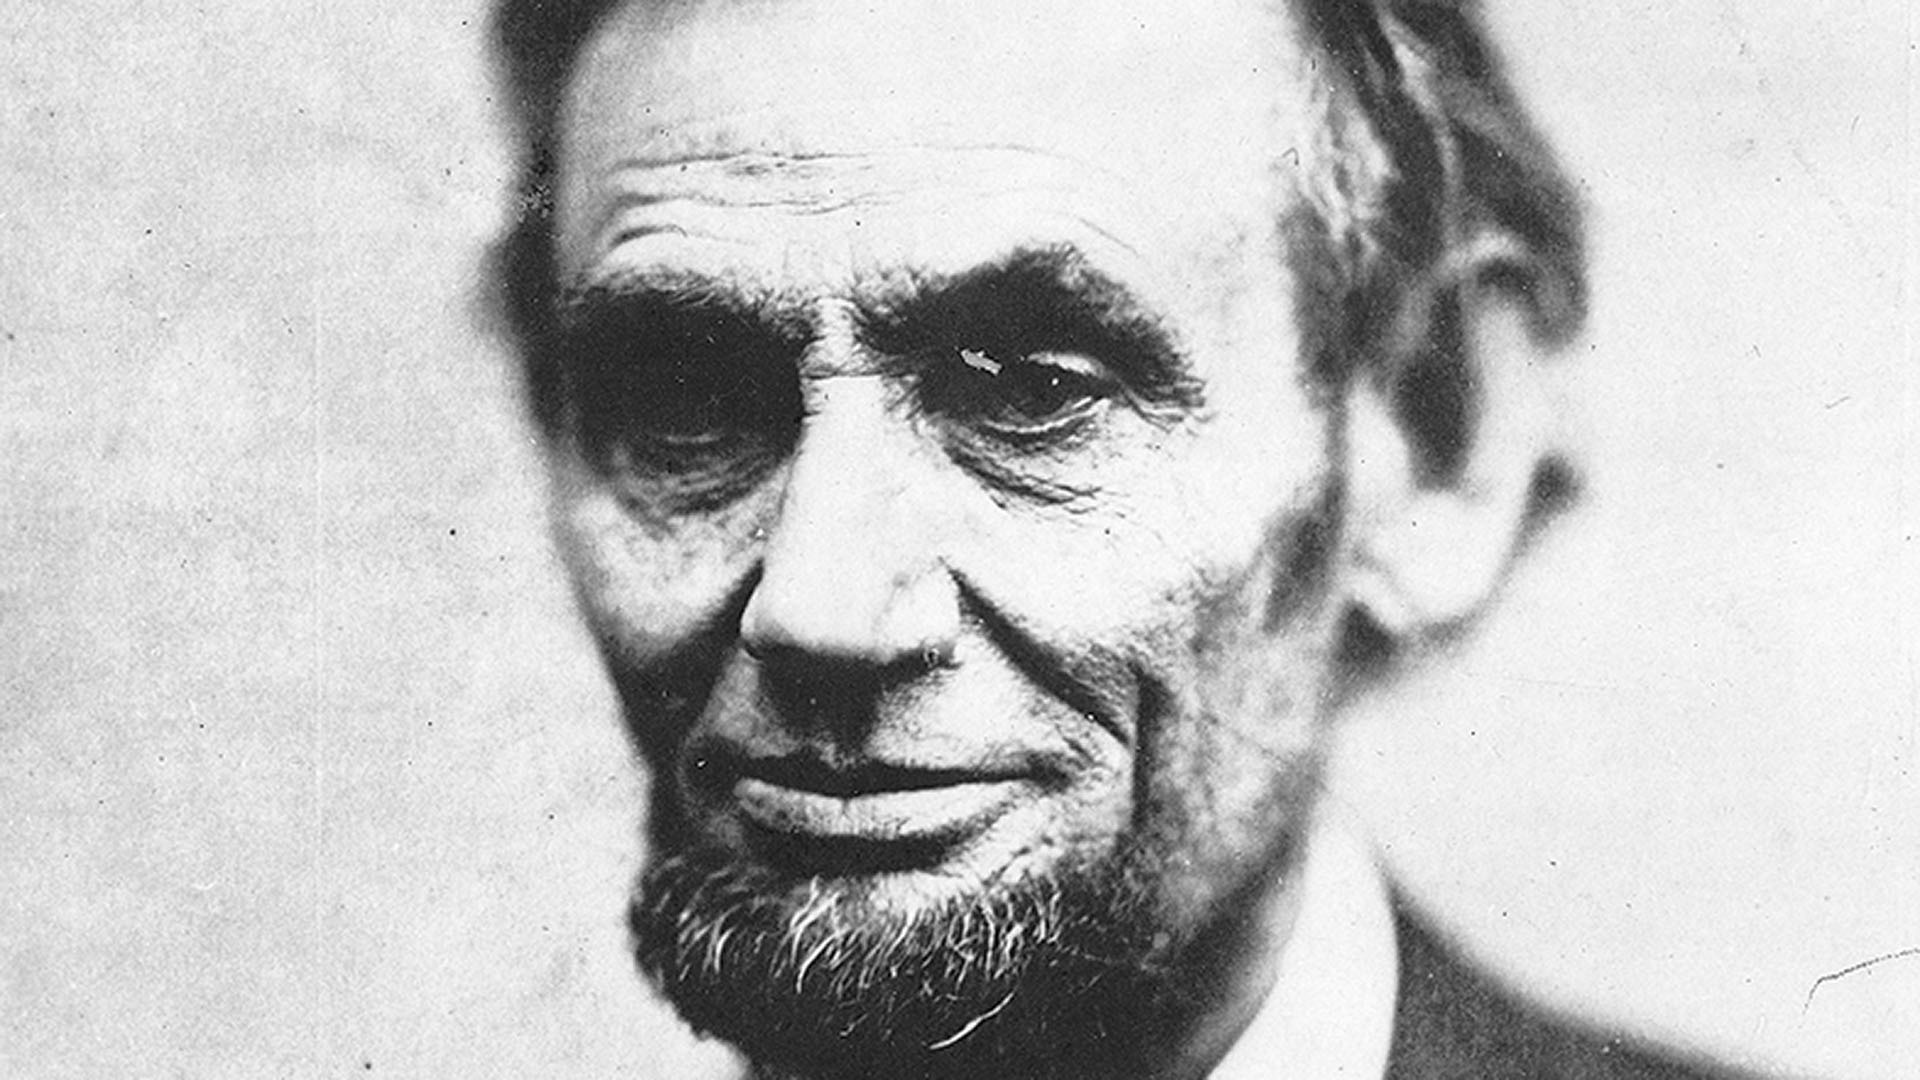 A black-and-white photo showing a close-up of Abraham Lincoln's face, circa spring 1865.